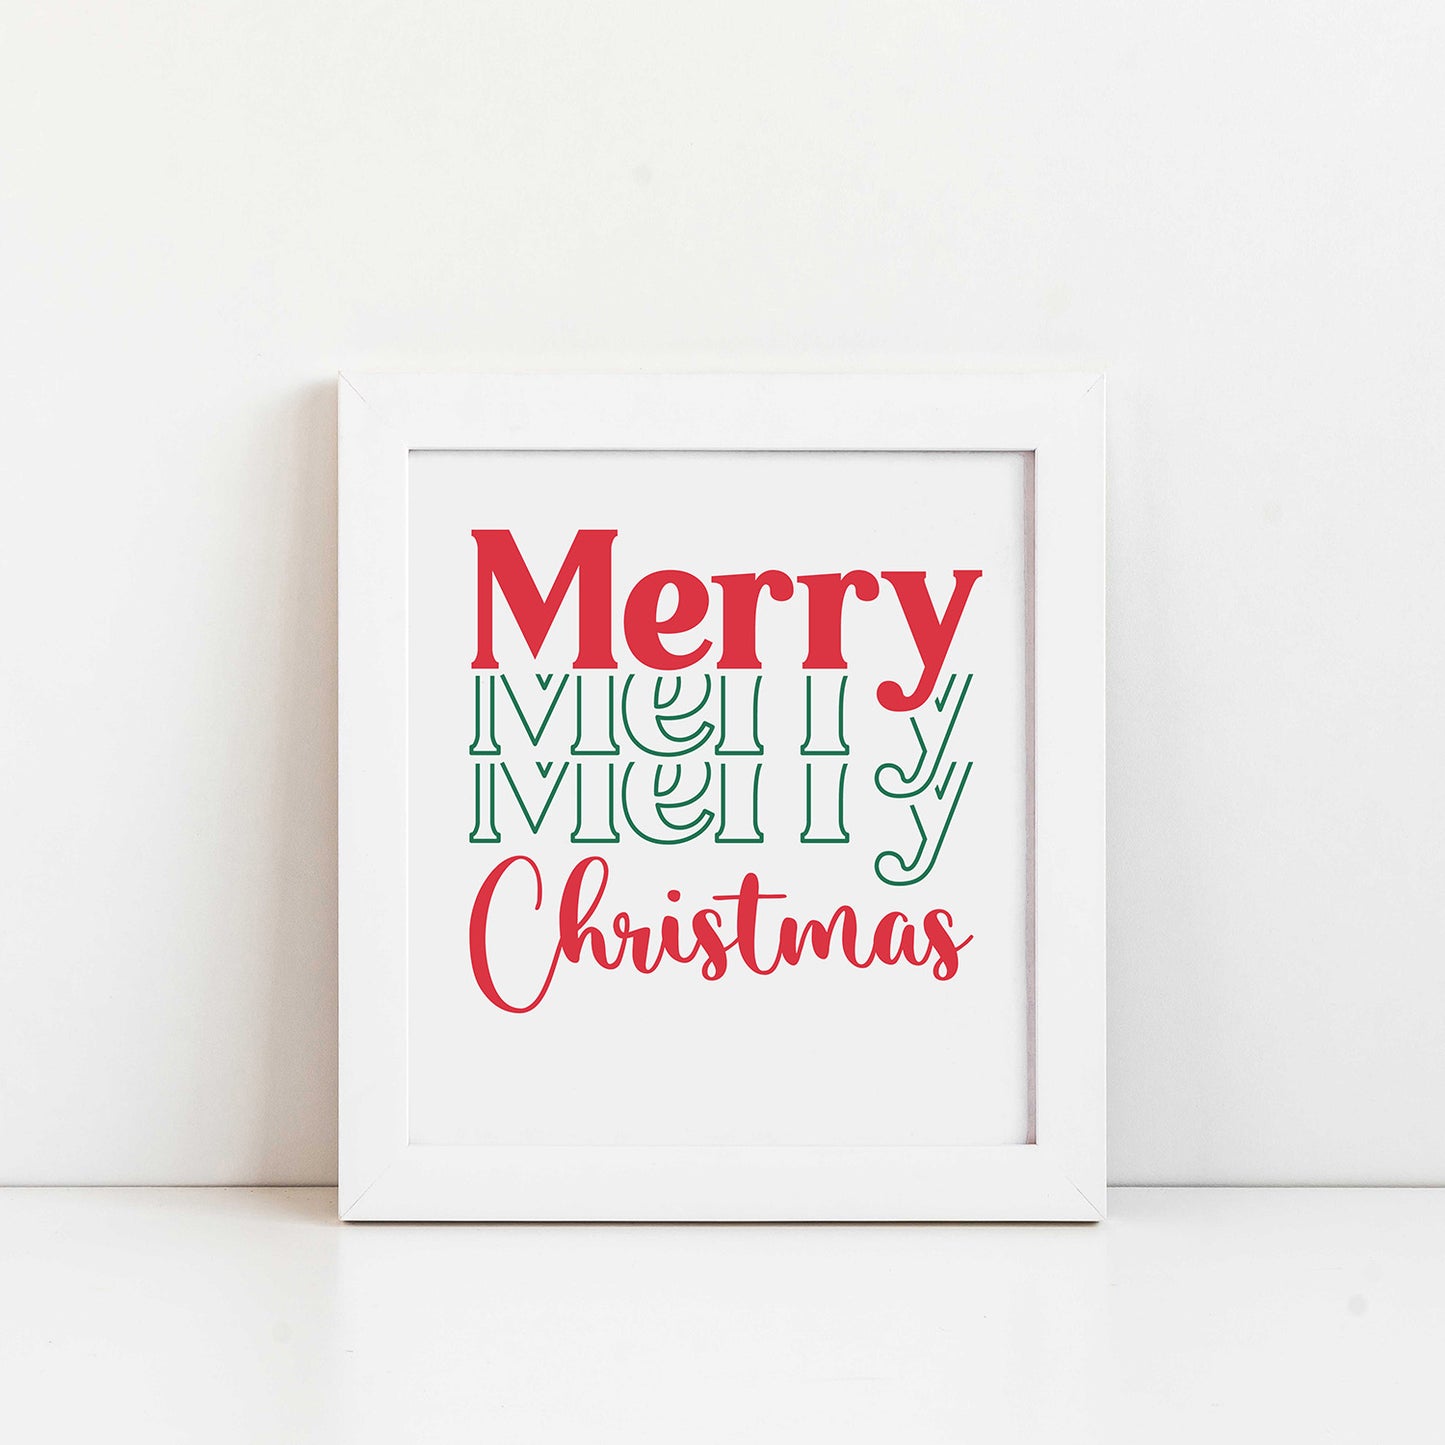 "Merry Merry Merry Christmas" Graphic